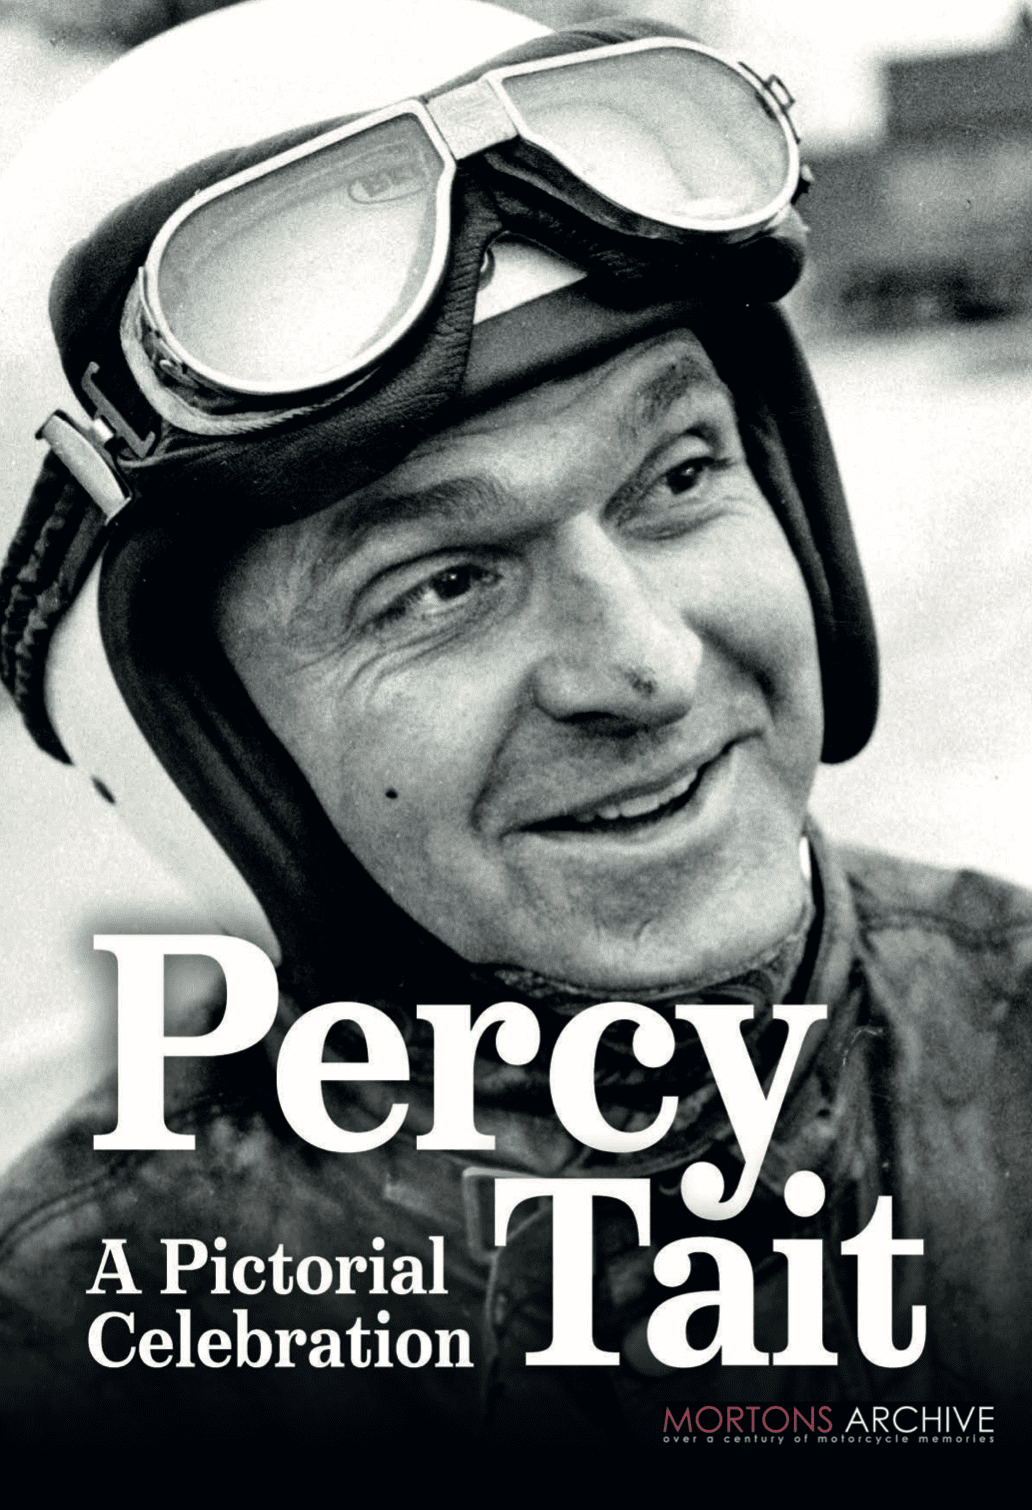 Celebrate the life & times of Percy Tait with Mortons Archive pictorial